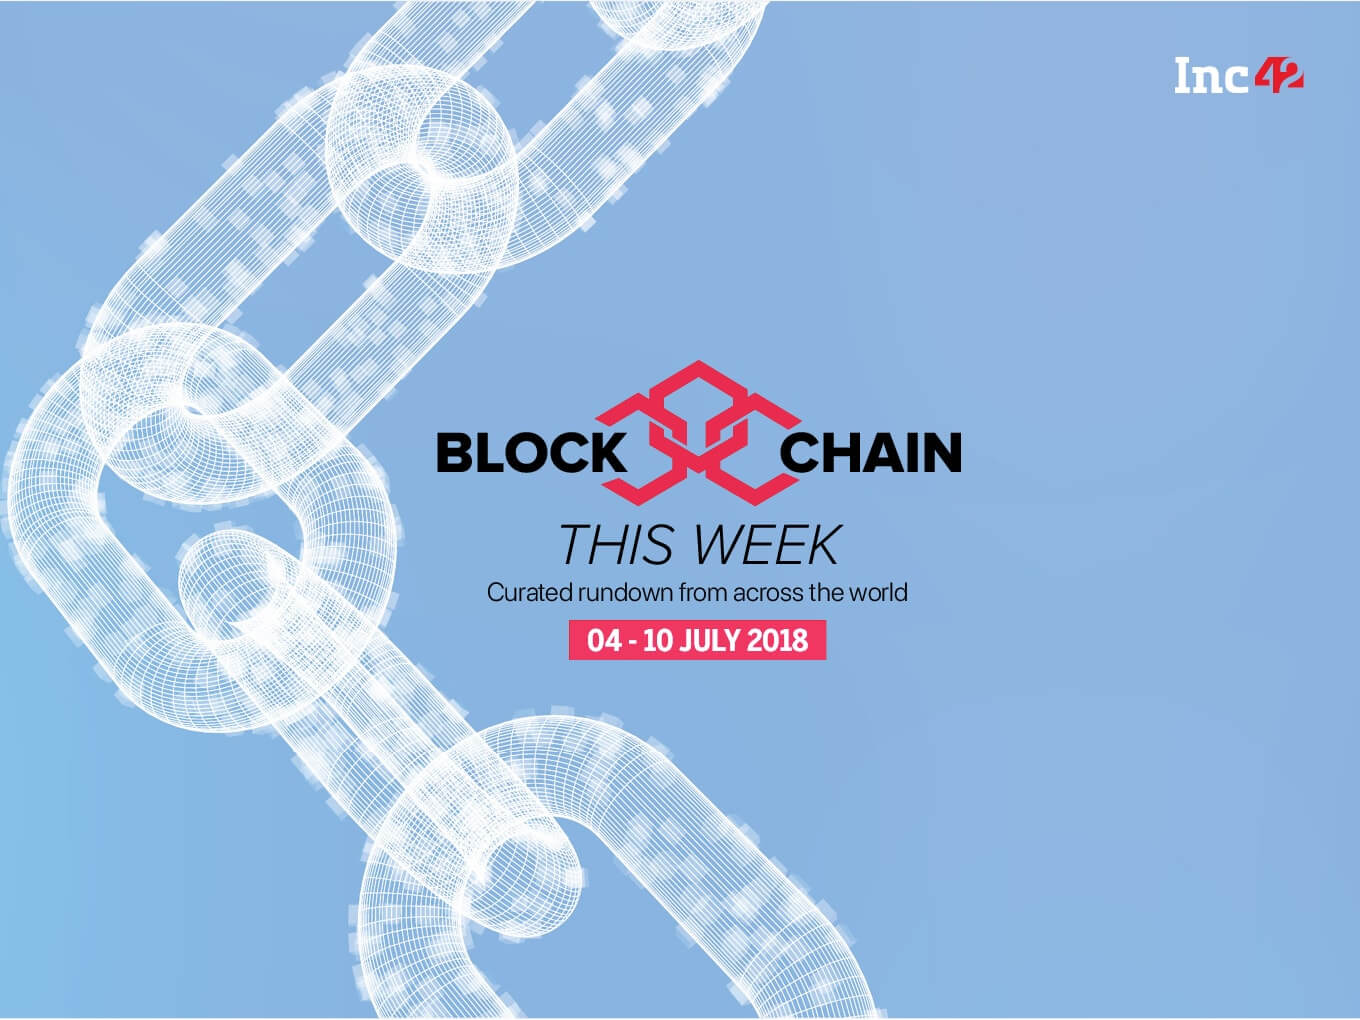 Blockchain This Week: Tech Mahindra To Set Up Blockchain Centre, Kwikxchange To Expand To India, And More